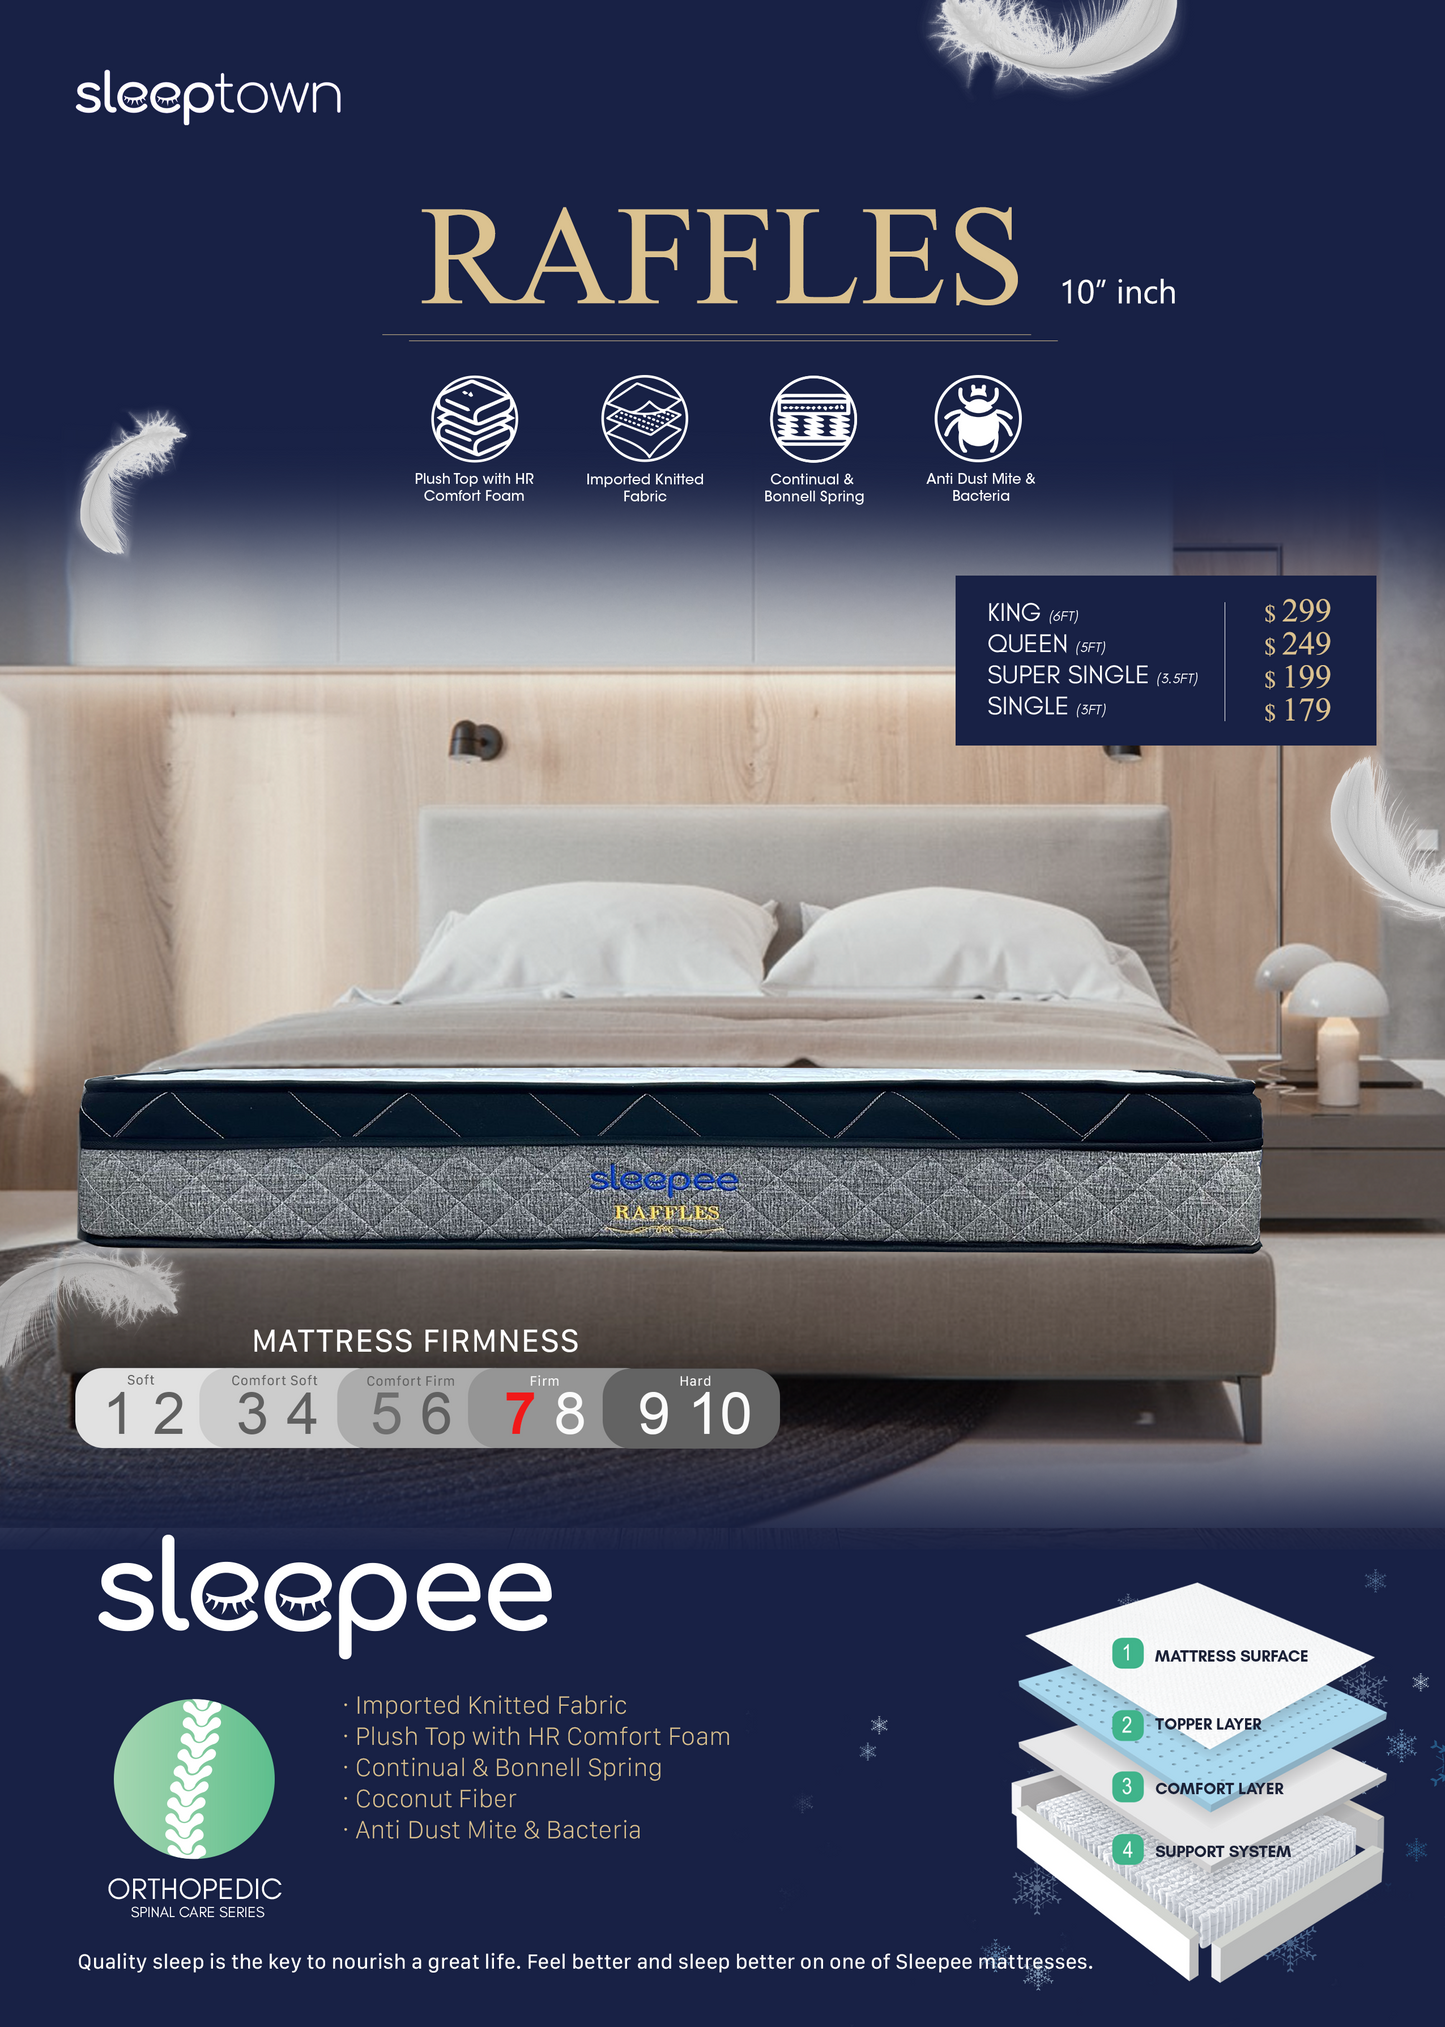 Sleepee Raffles - 10"inch Imported Knitted Fabric with Orthopedic Spring Mattress